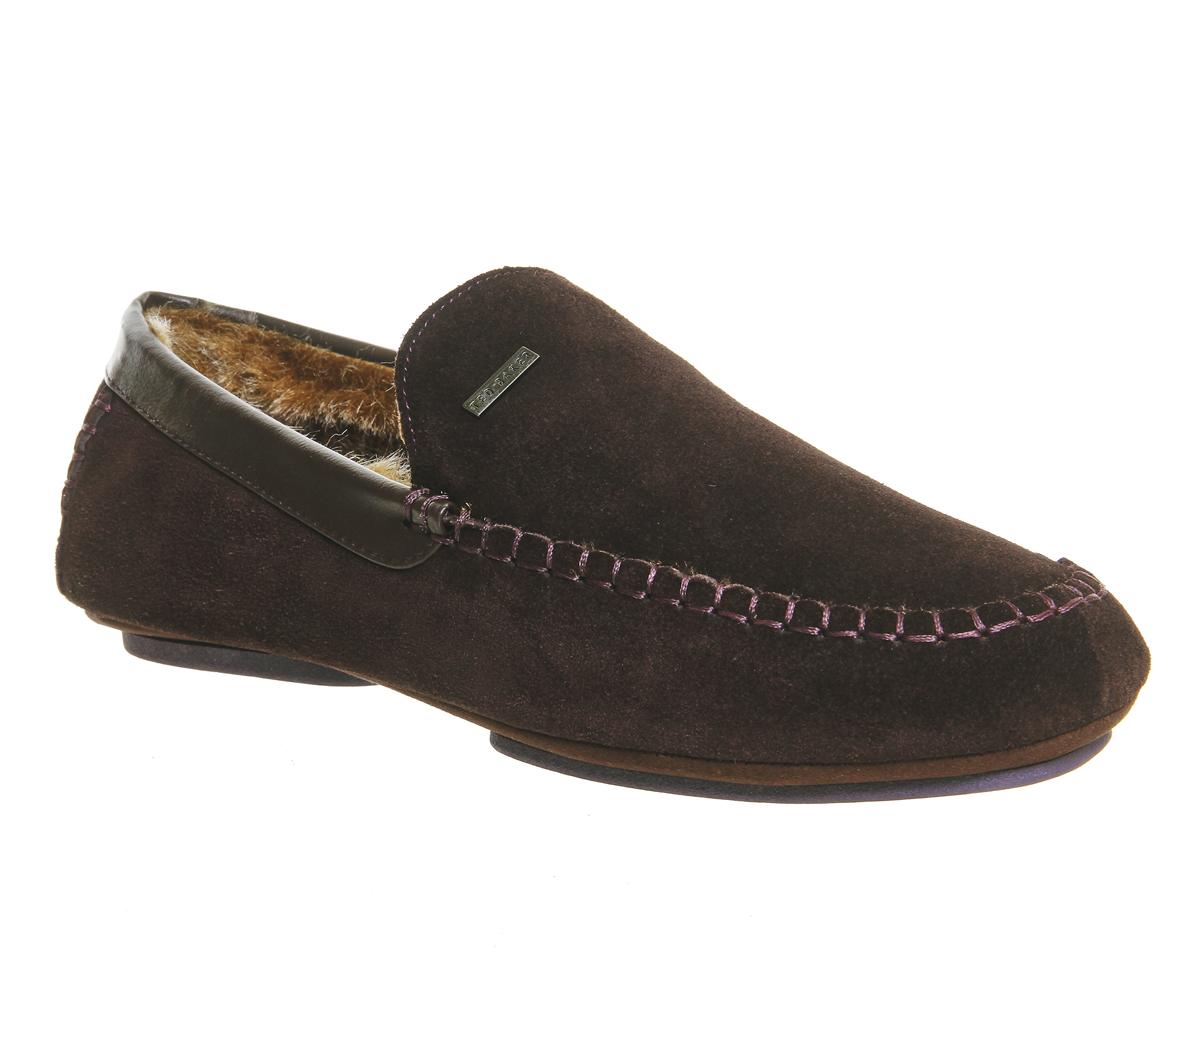 Ted BakerMoriss SlippersBrown Suede